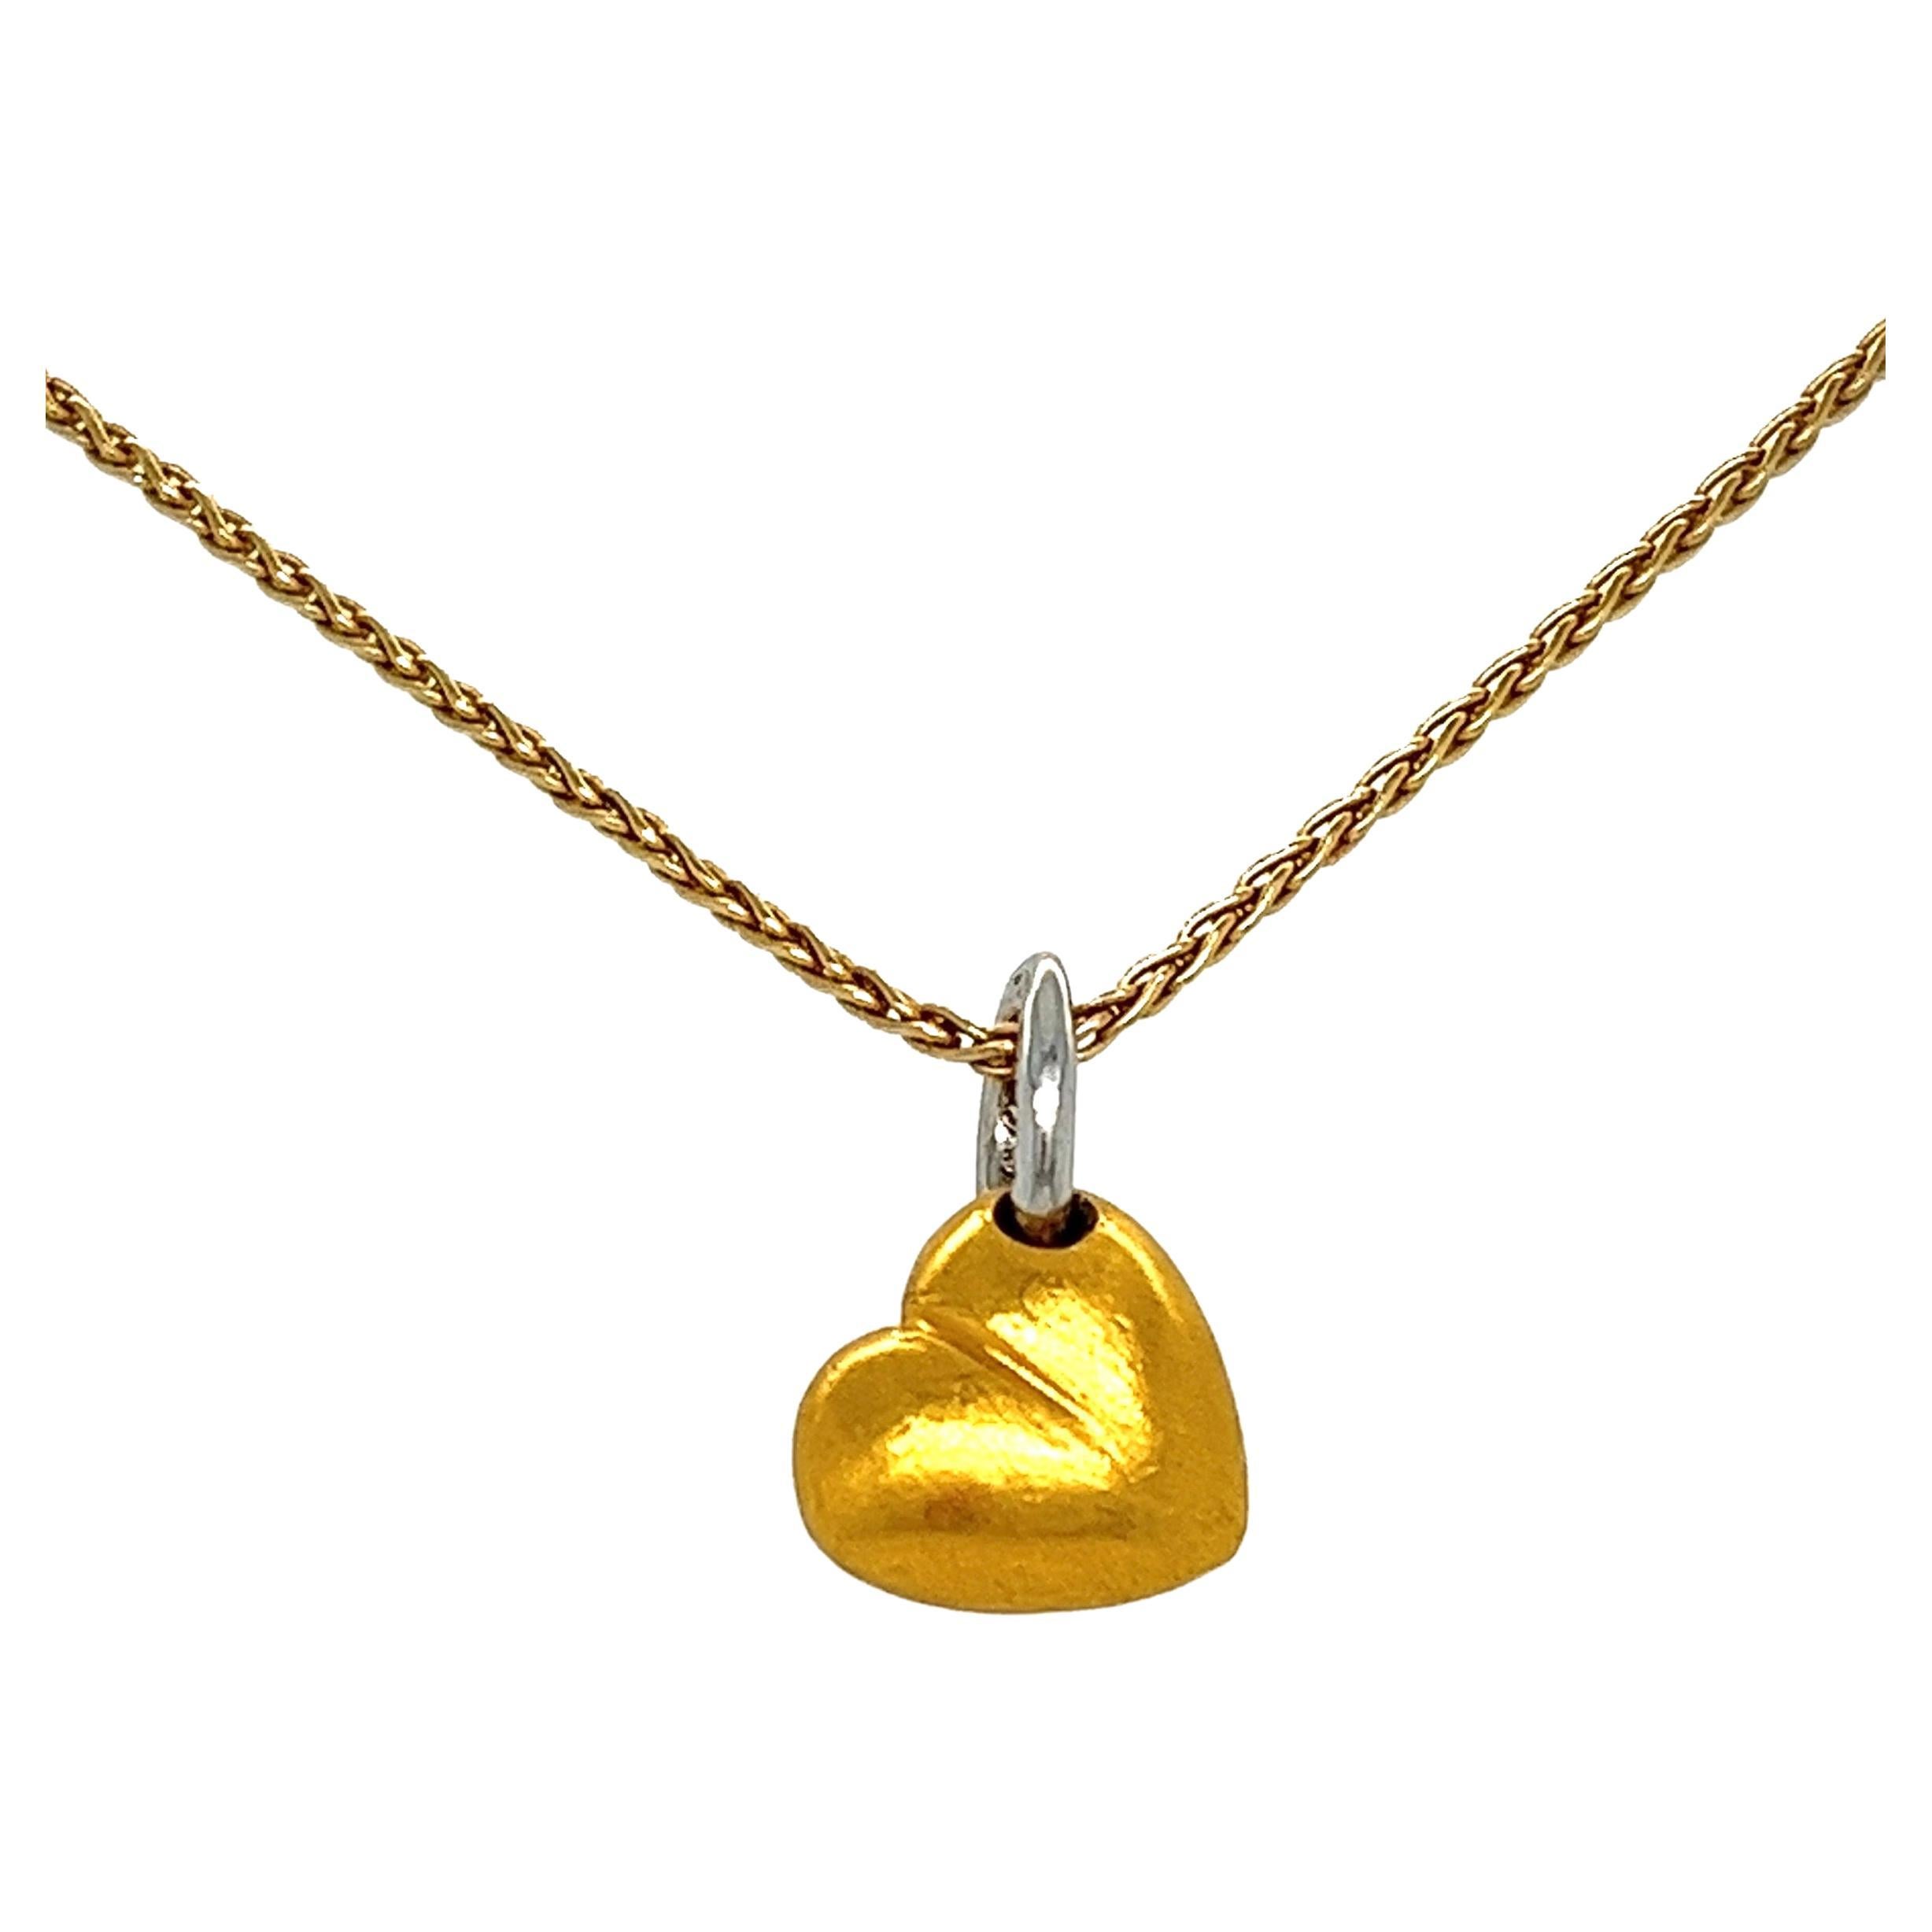 Elegant 18kt Gold Puffed Heart Pendant with Platinum Diamond Bale, made in Italy

Experience luxury with this exquisite 18kt solid gold puffed heart pendant adorned with a platinum bale set with natural top-quality earth-mined diamonds. The petite